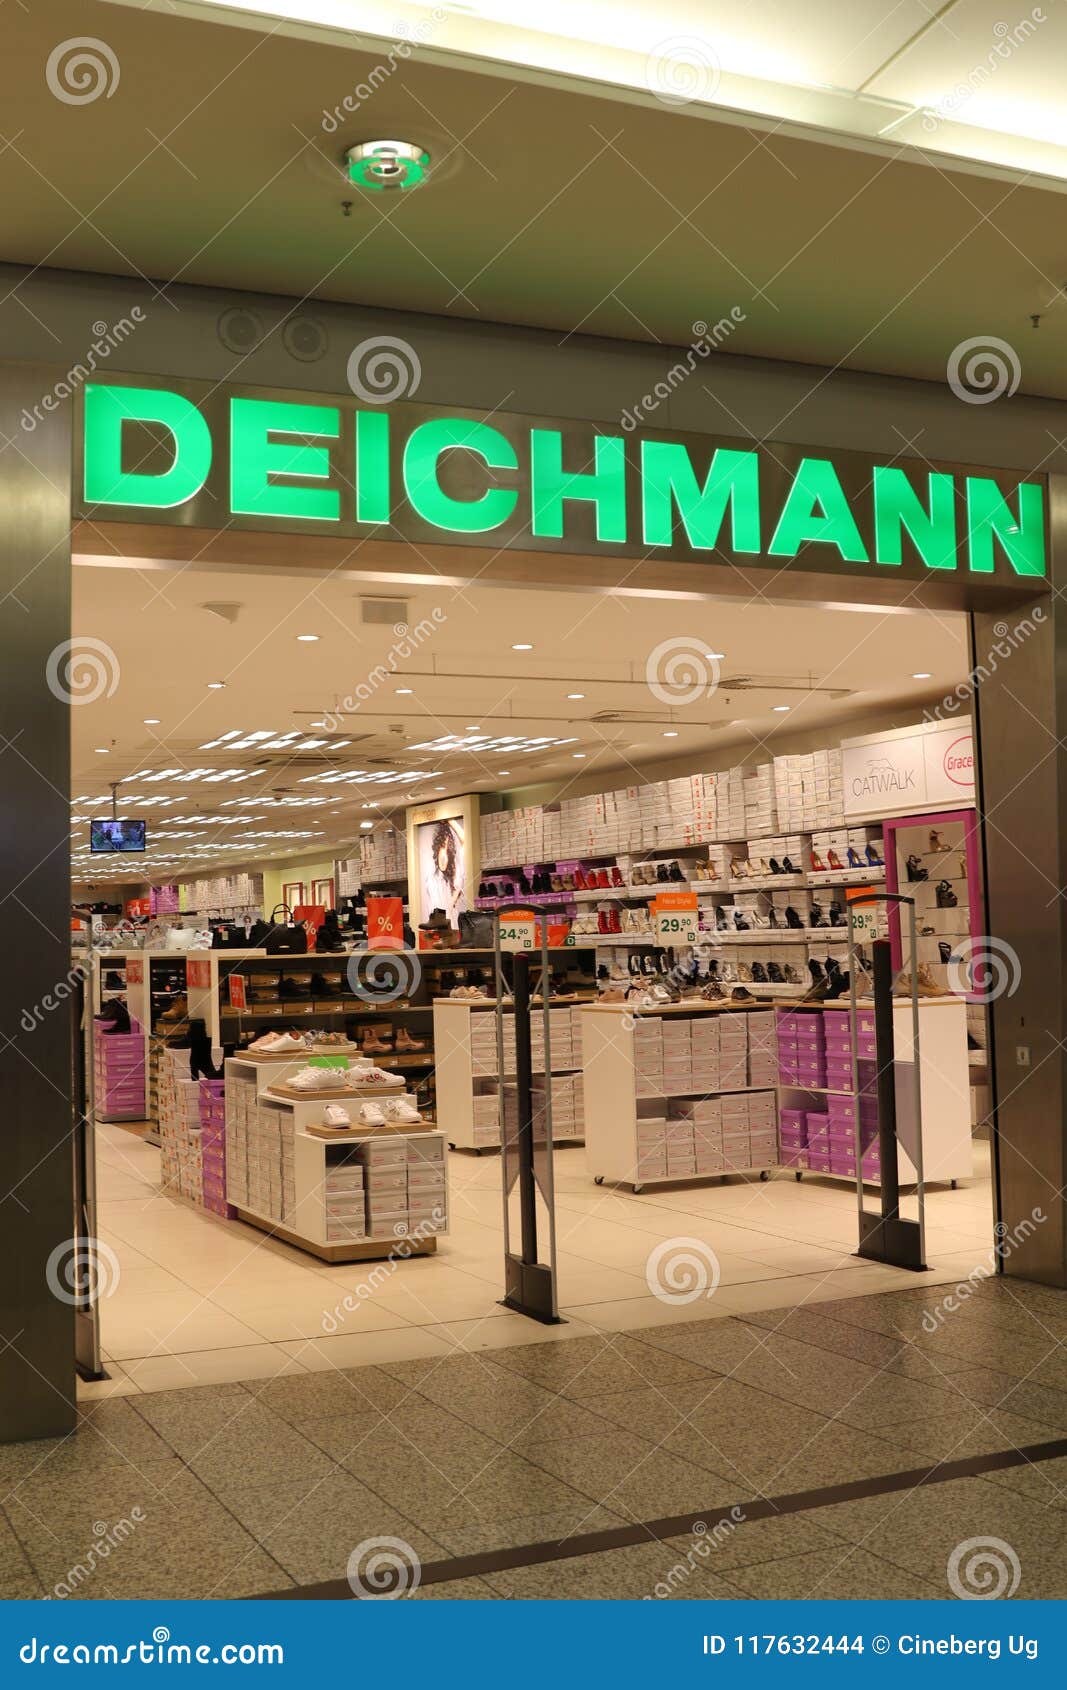 Deichmann store editorial stock image. Image of german - 117632444